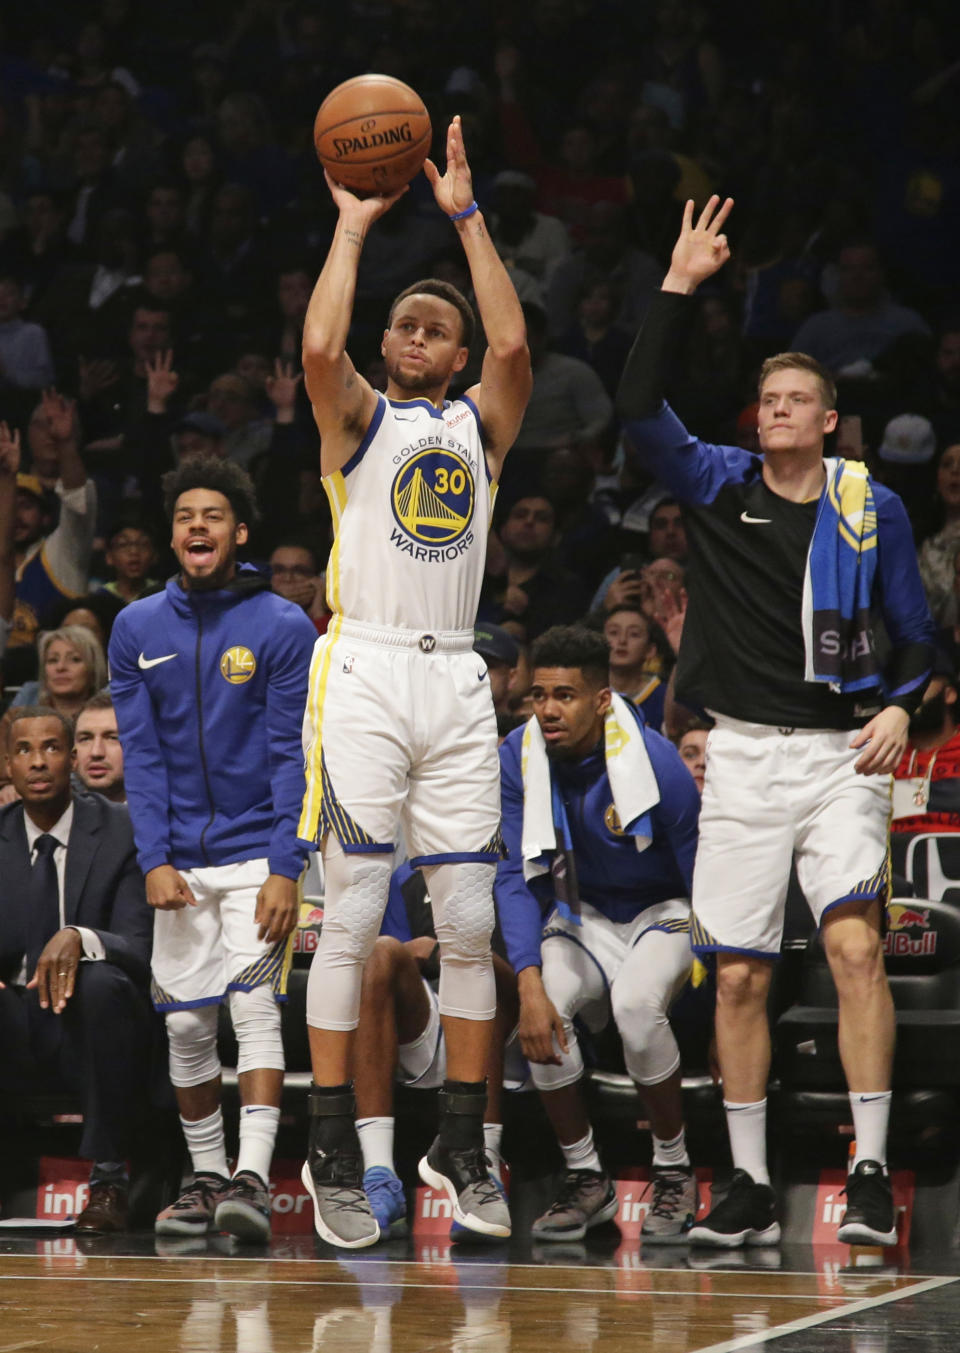 Golden State Warriors react as teammate Stephen Curry shoots a three-point basket during the first half of an NBA basketball game against the Brooklyn Nets, Sunday, Oct. 28, 2018, in New York. (AP Photo/Frank Franklin II)